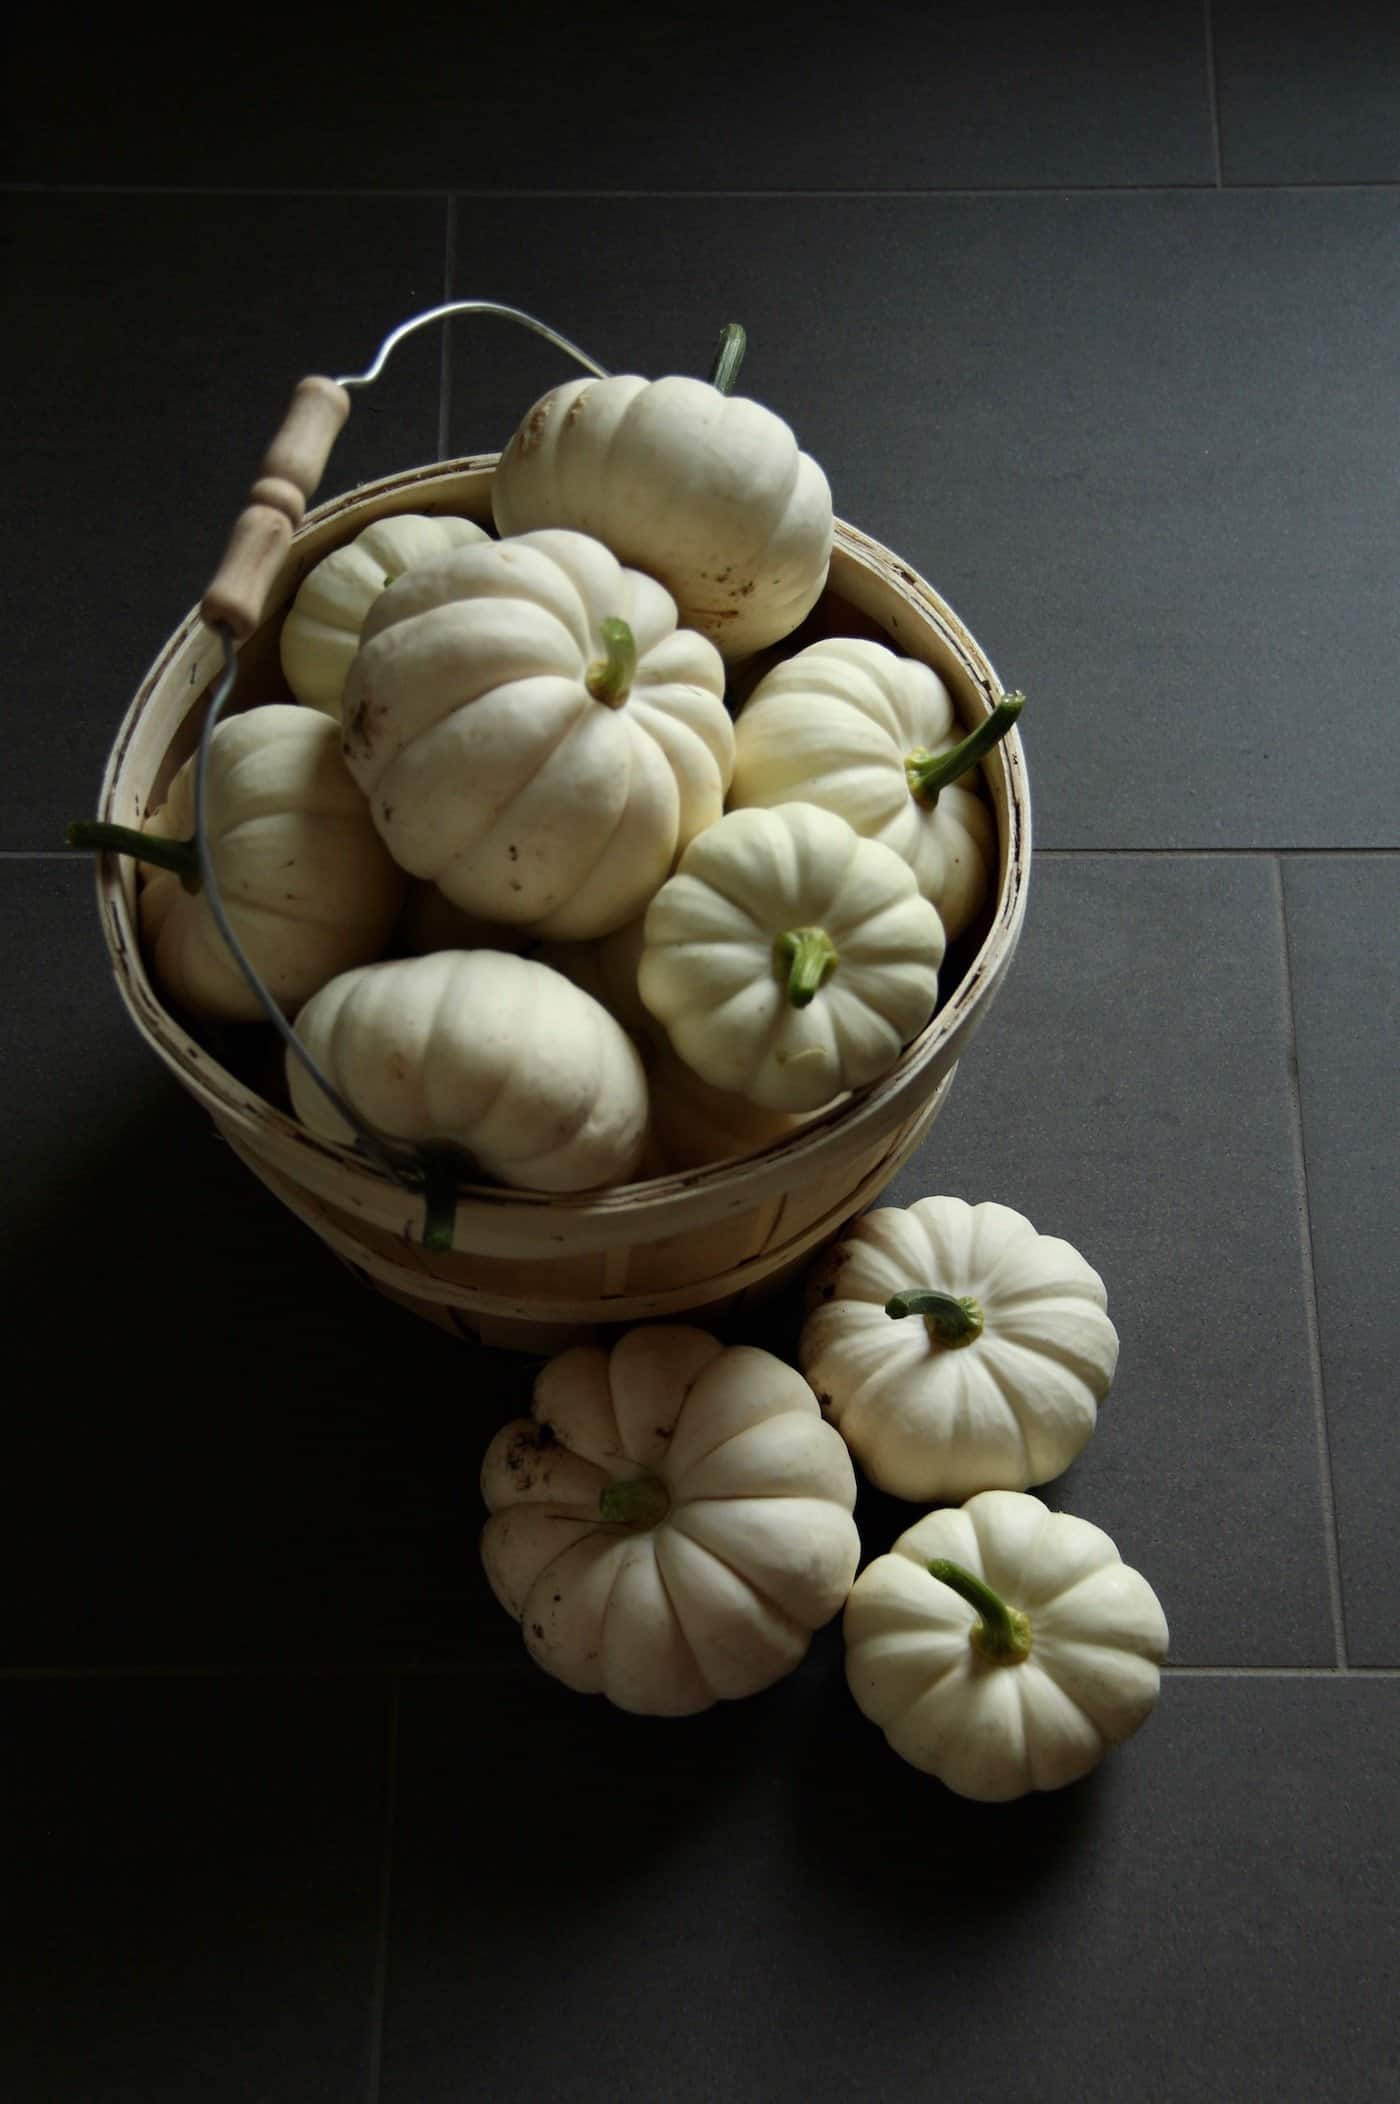 Pumpkins are easy to grow with the right instructions! Here's how to grow organic pumpkins - everything you need to know | home for the harvest #pumpkin #pumpkins #organicpumpkin #organicpumpkins #growpumpkins #howtogrowpumpkins #organicgardening #homefortheharvest